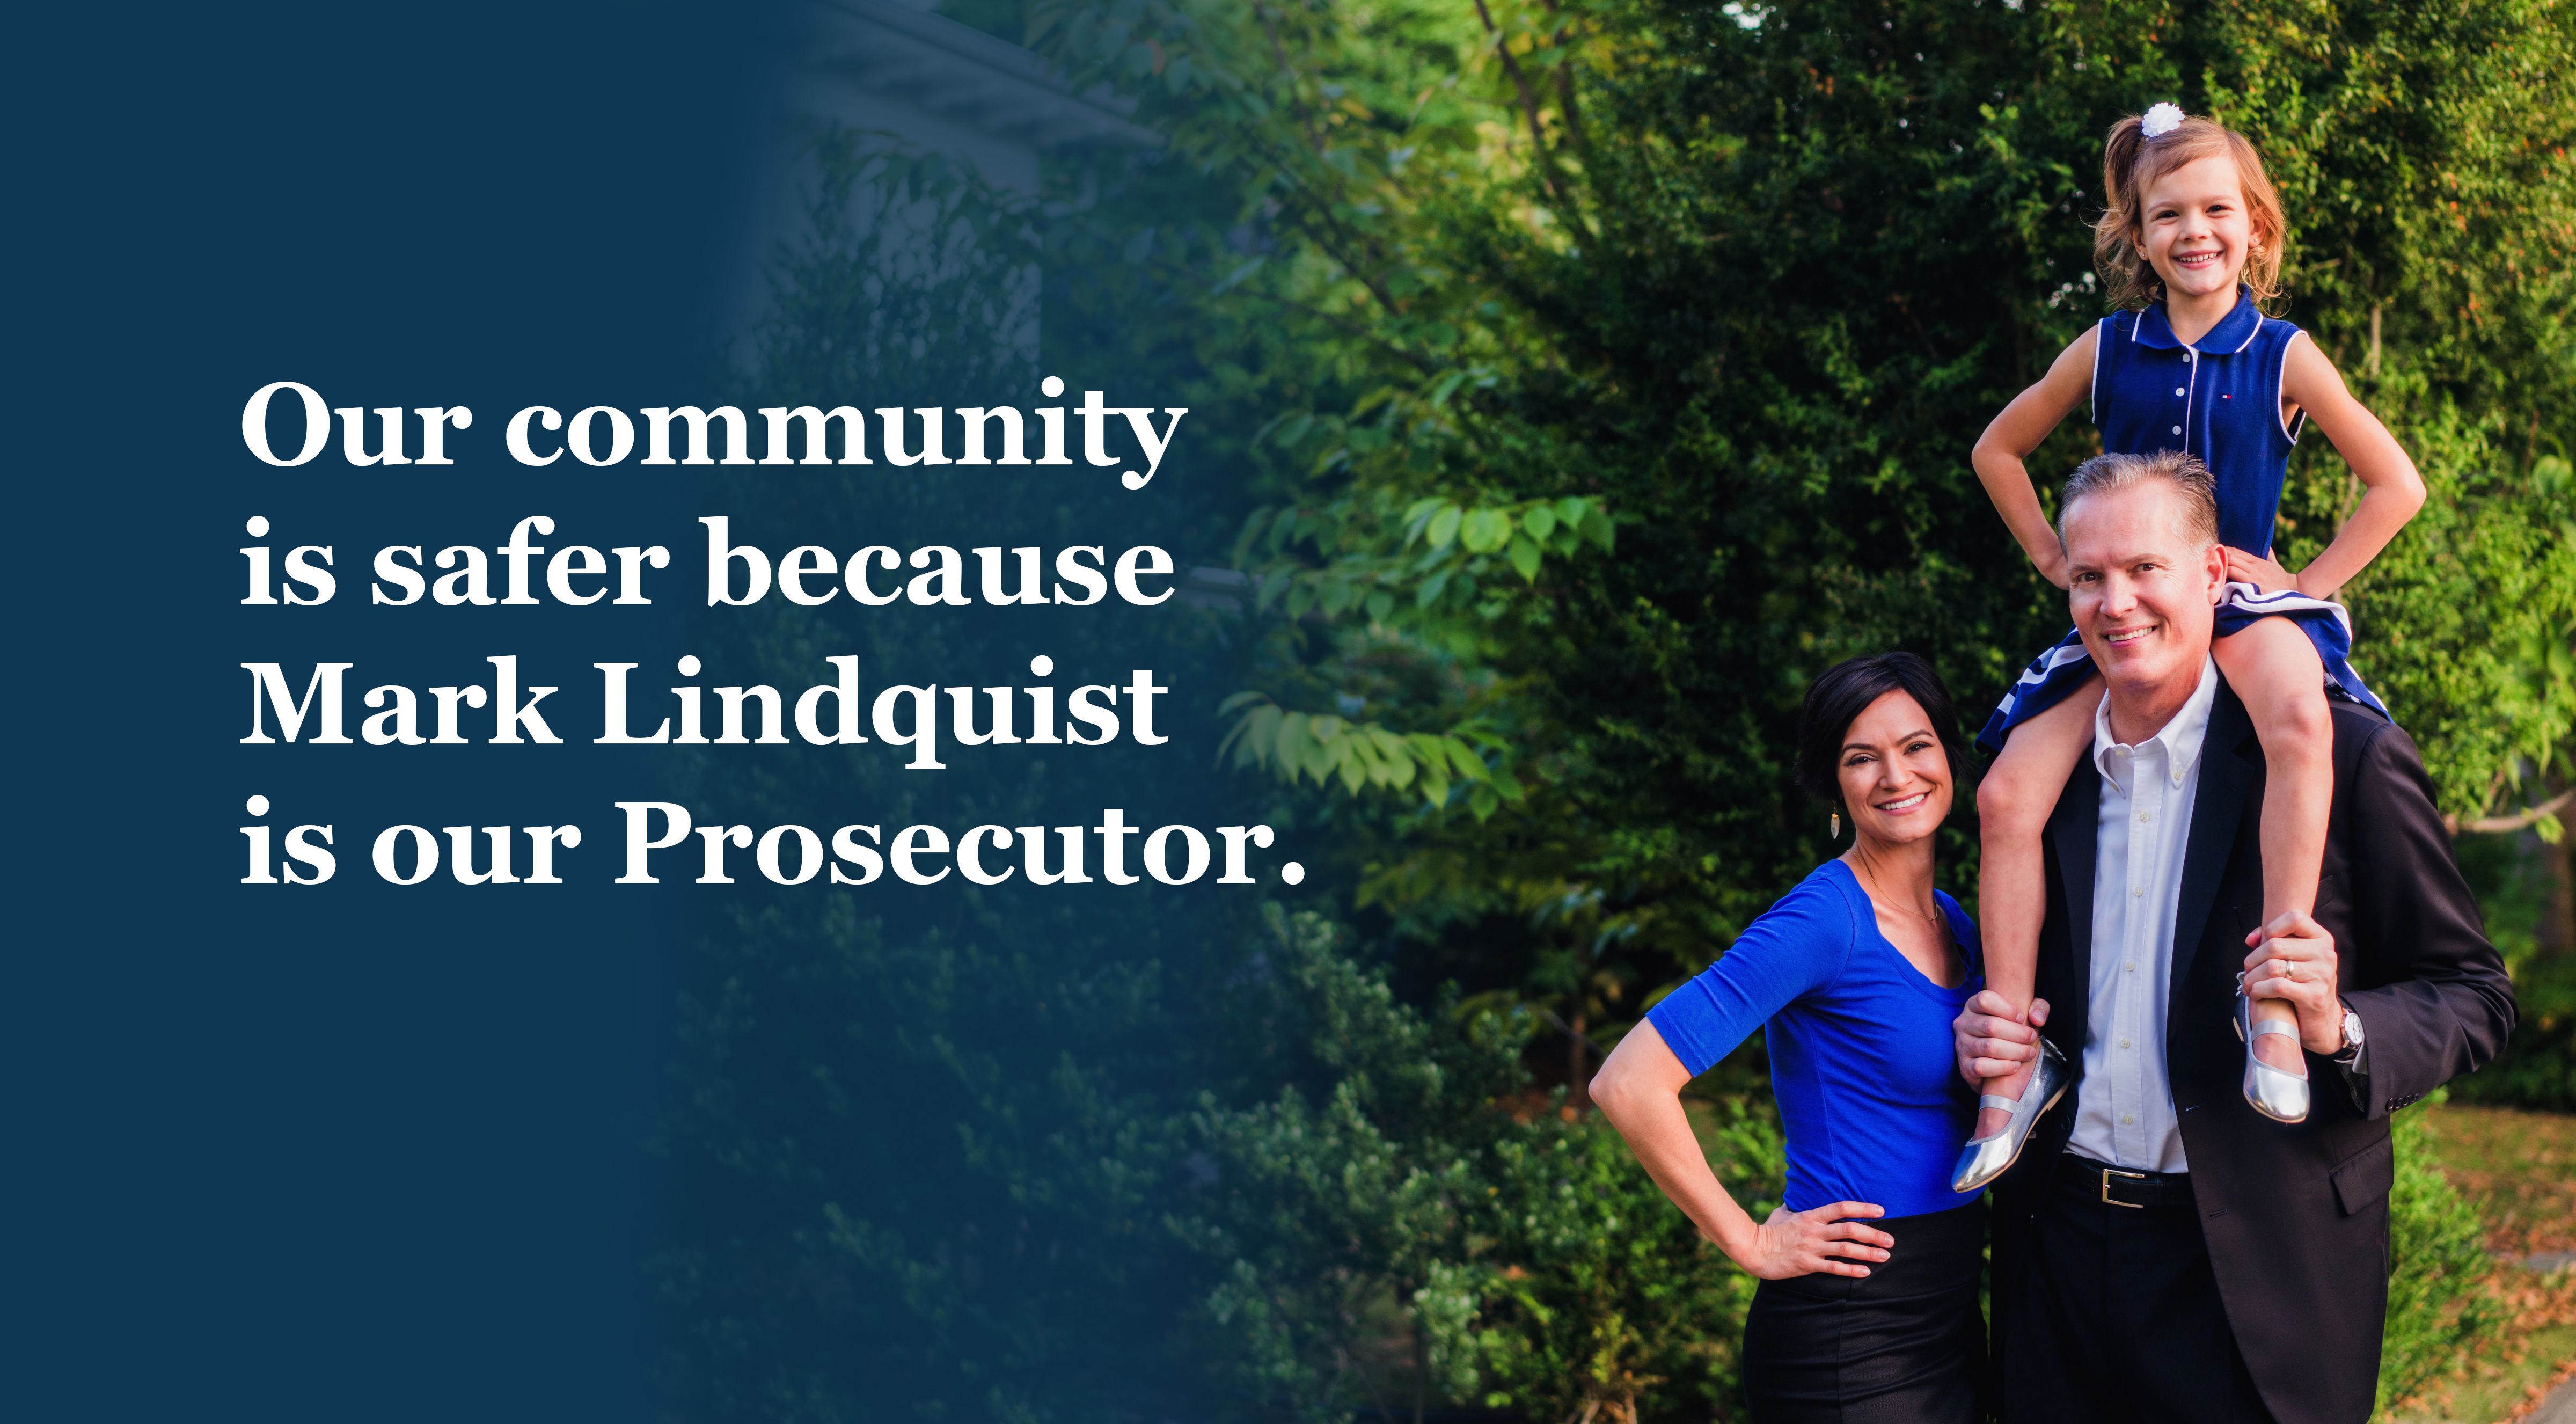 Our Prosecutor Mark Lindquist and family